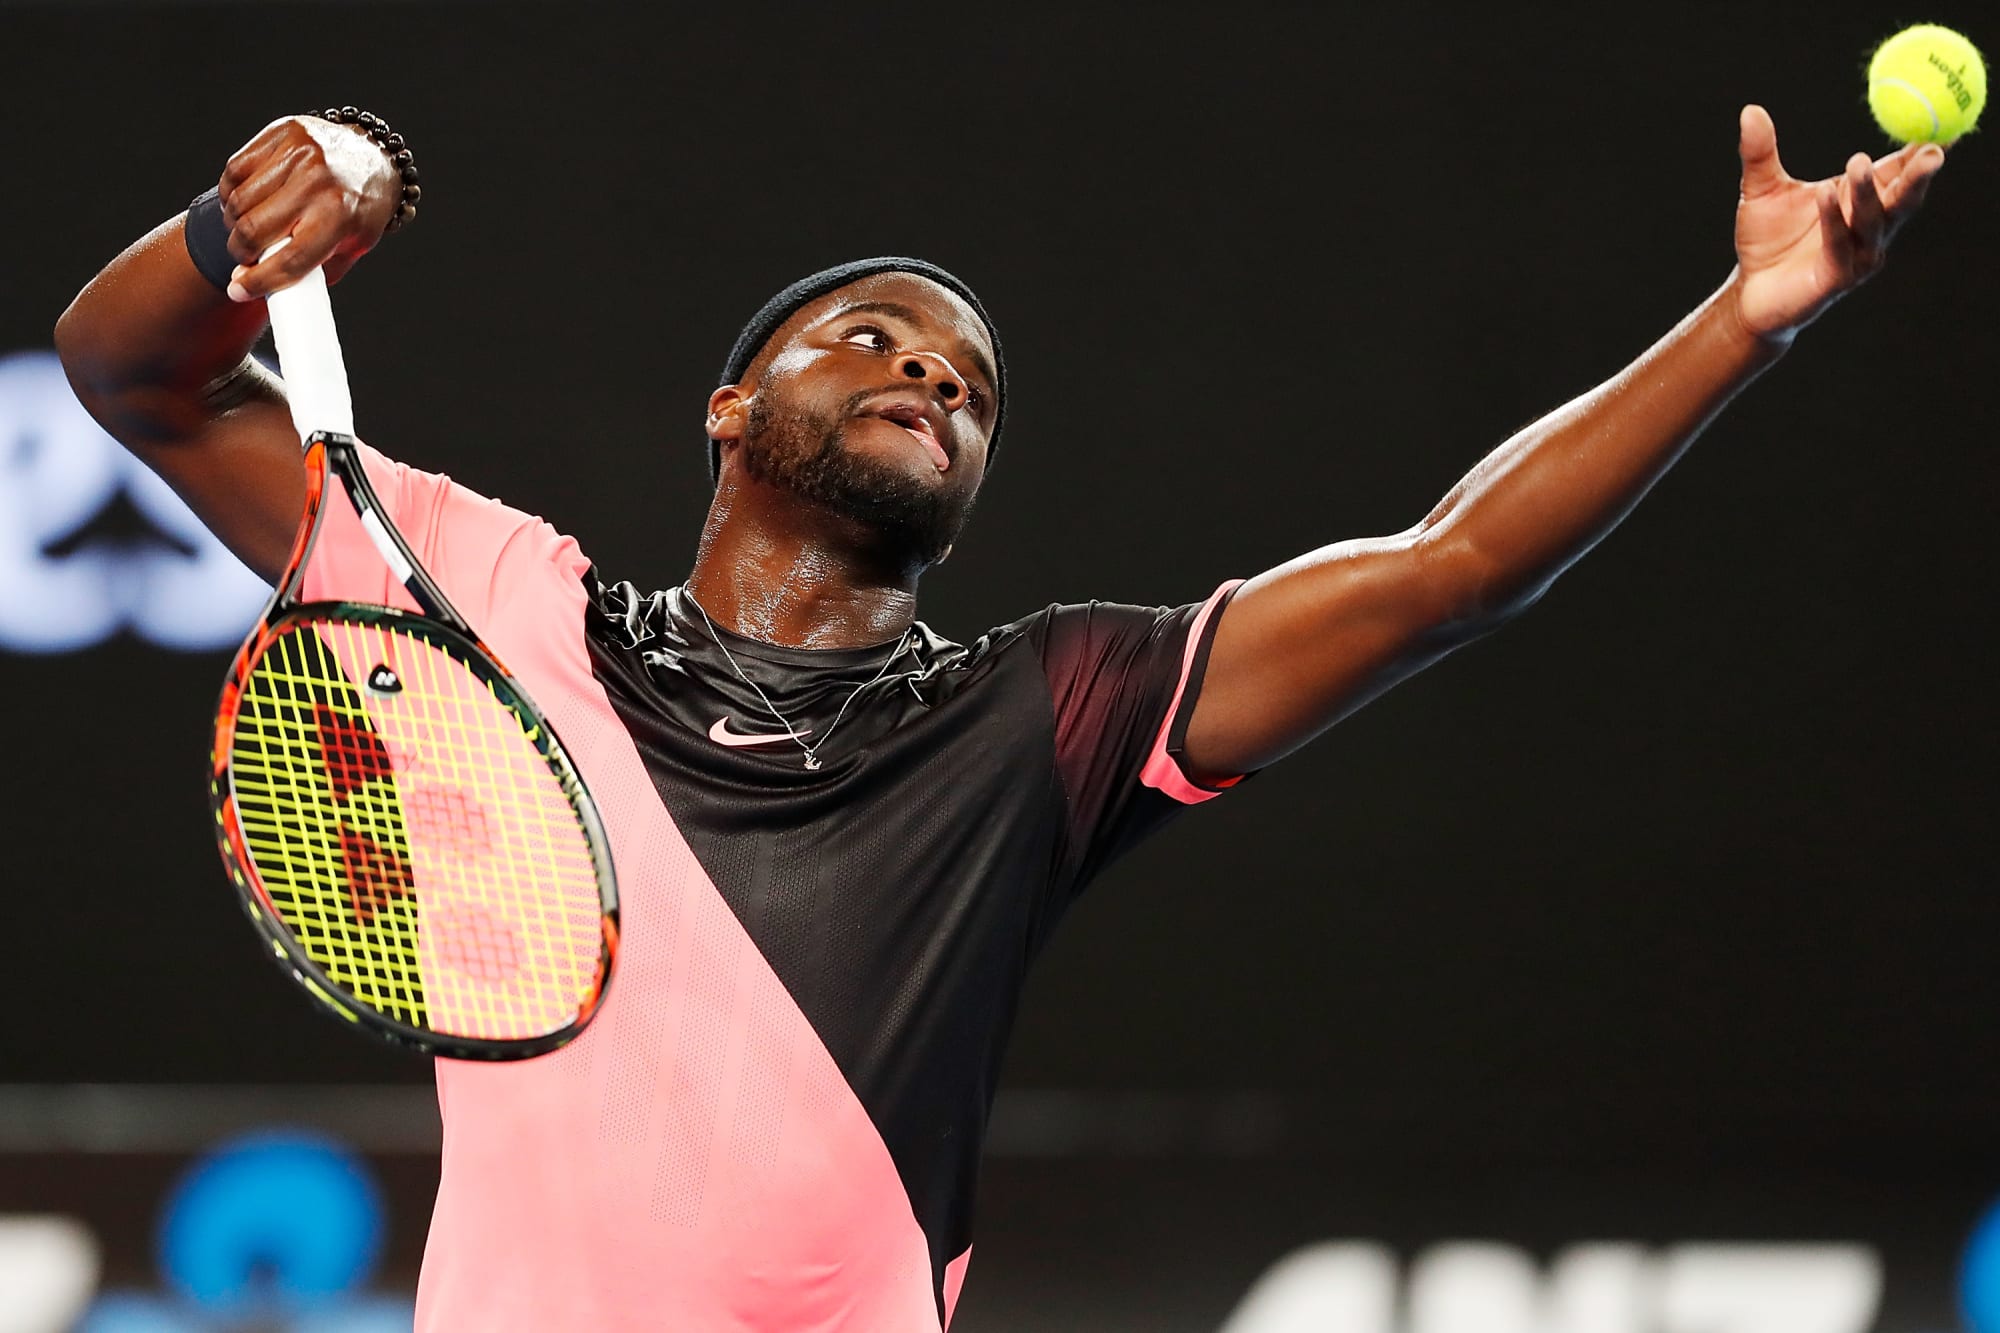 February 22, 2018: Frances Tiafoe, from USA, plays a backhand against Juan  Martin del Potro, from Argentina, during the 2018 Delray Beach Open ATP  professional tennis tournament, played at the Delray Beach